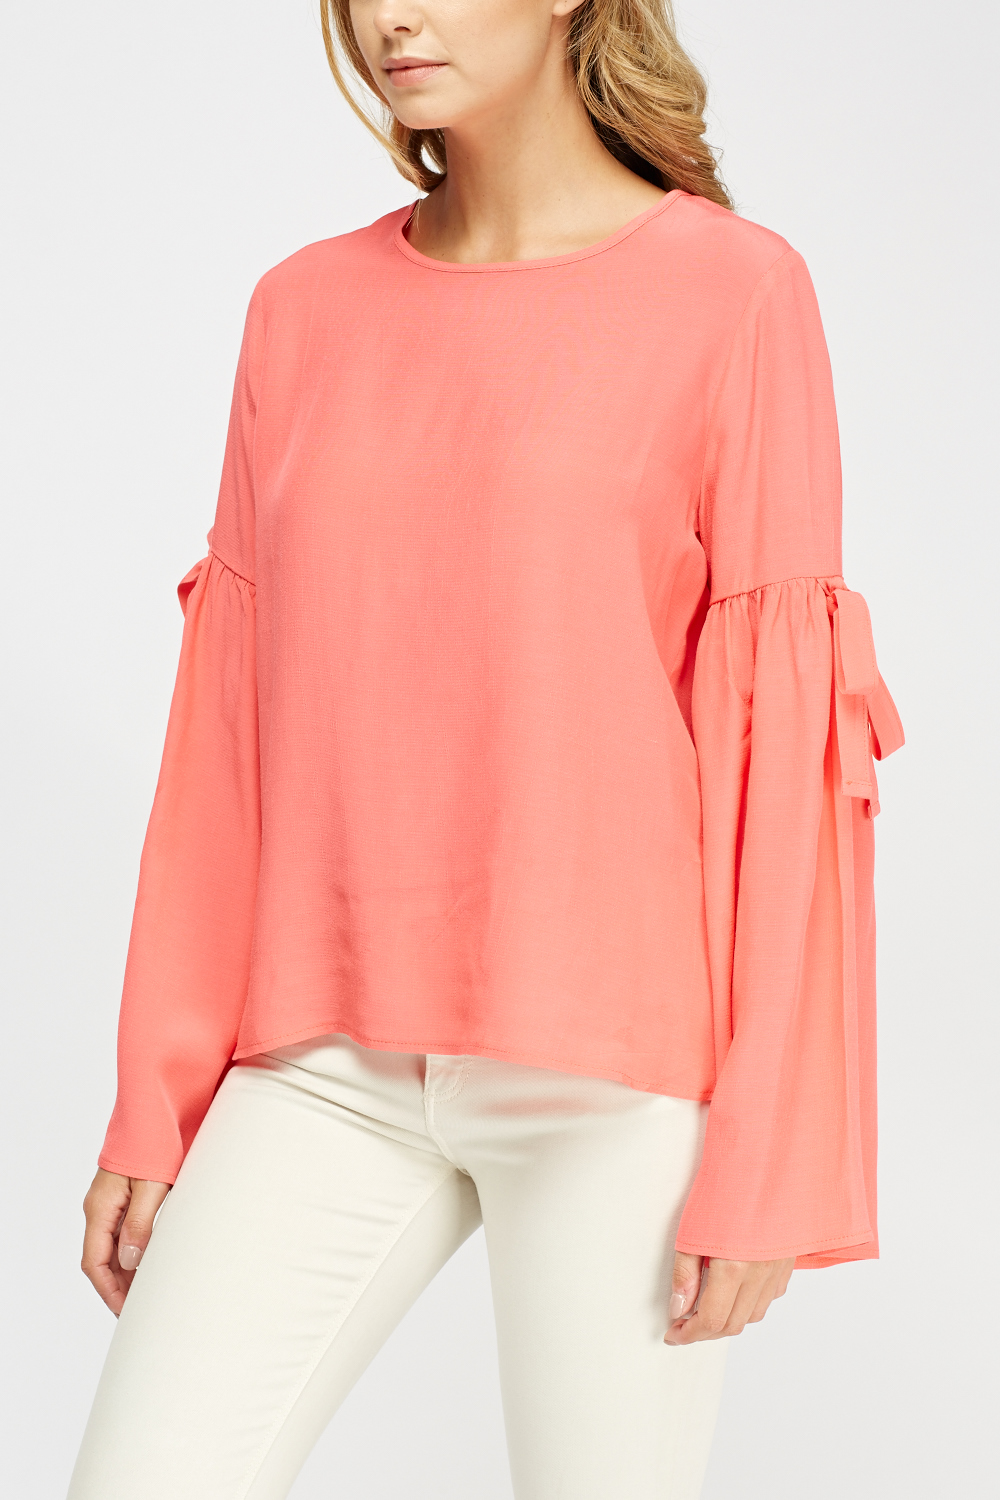 Flare Sleeve Neon Pink Top - Just $1